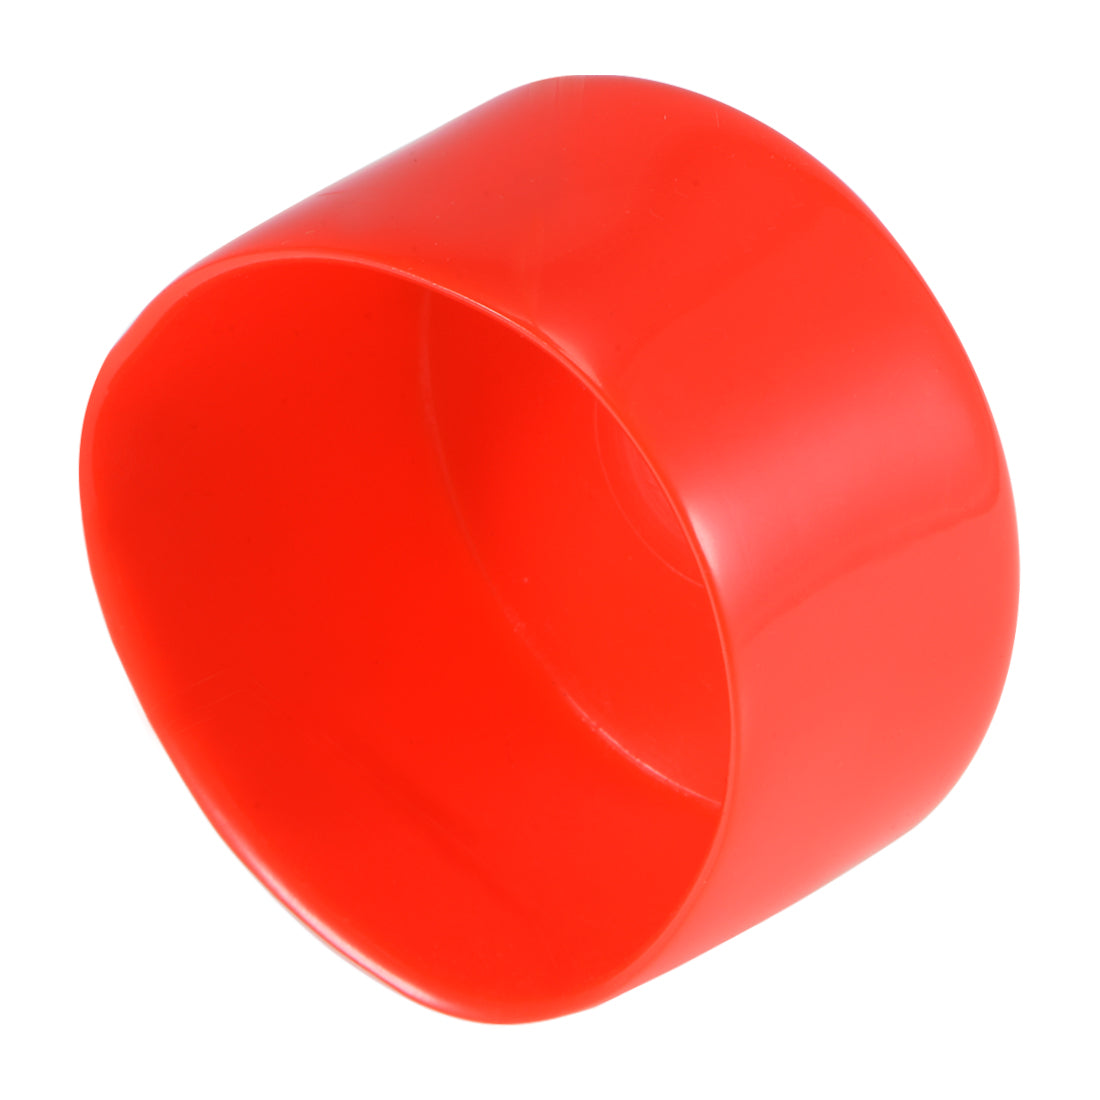 uxcell Uxcell 10pcs Rubber End Caps 50mm ID 40mm Height Screw Thread Protectors Red